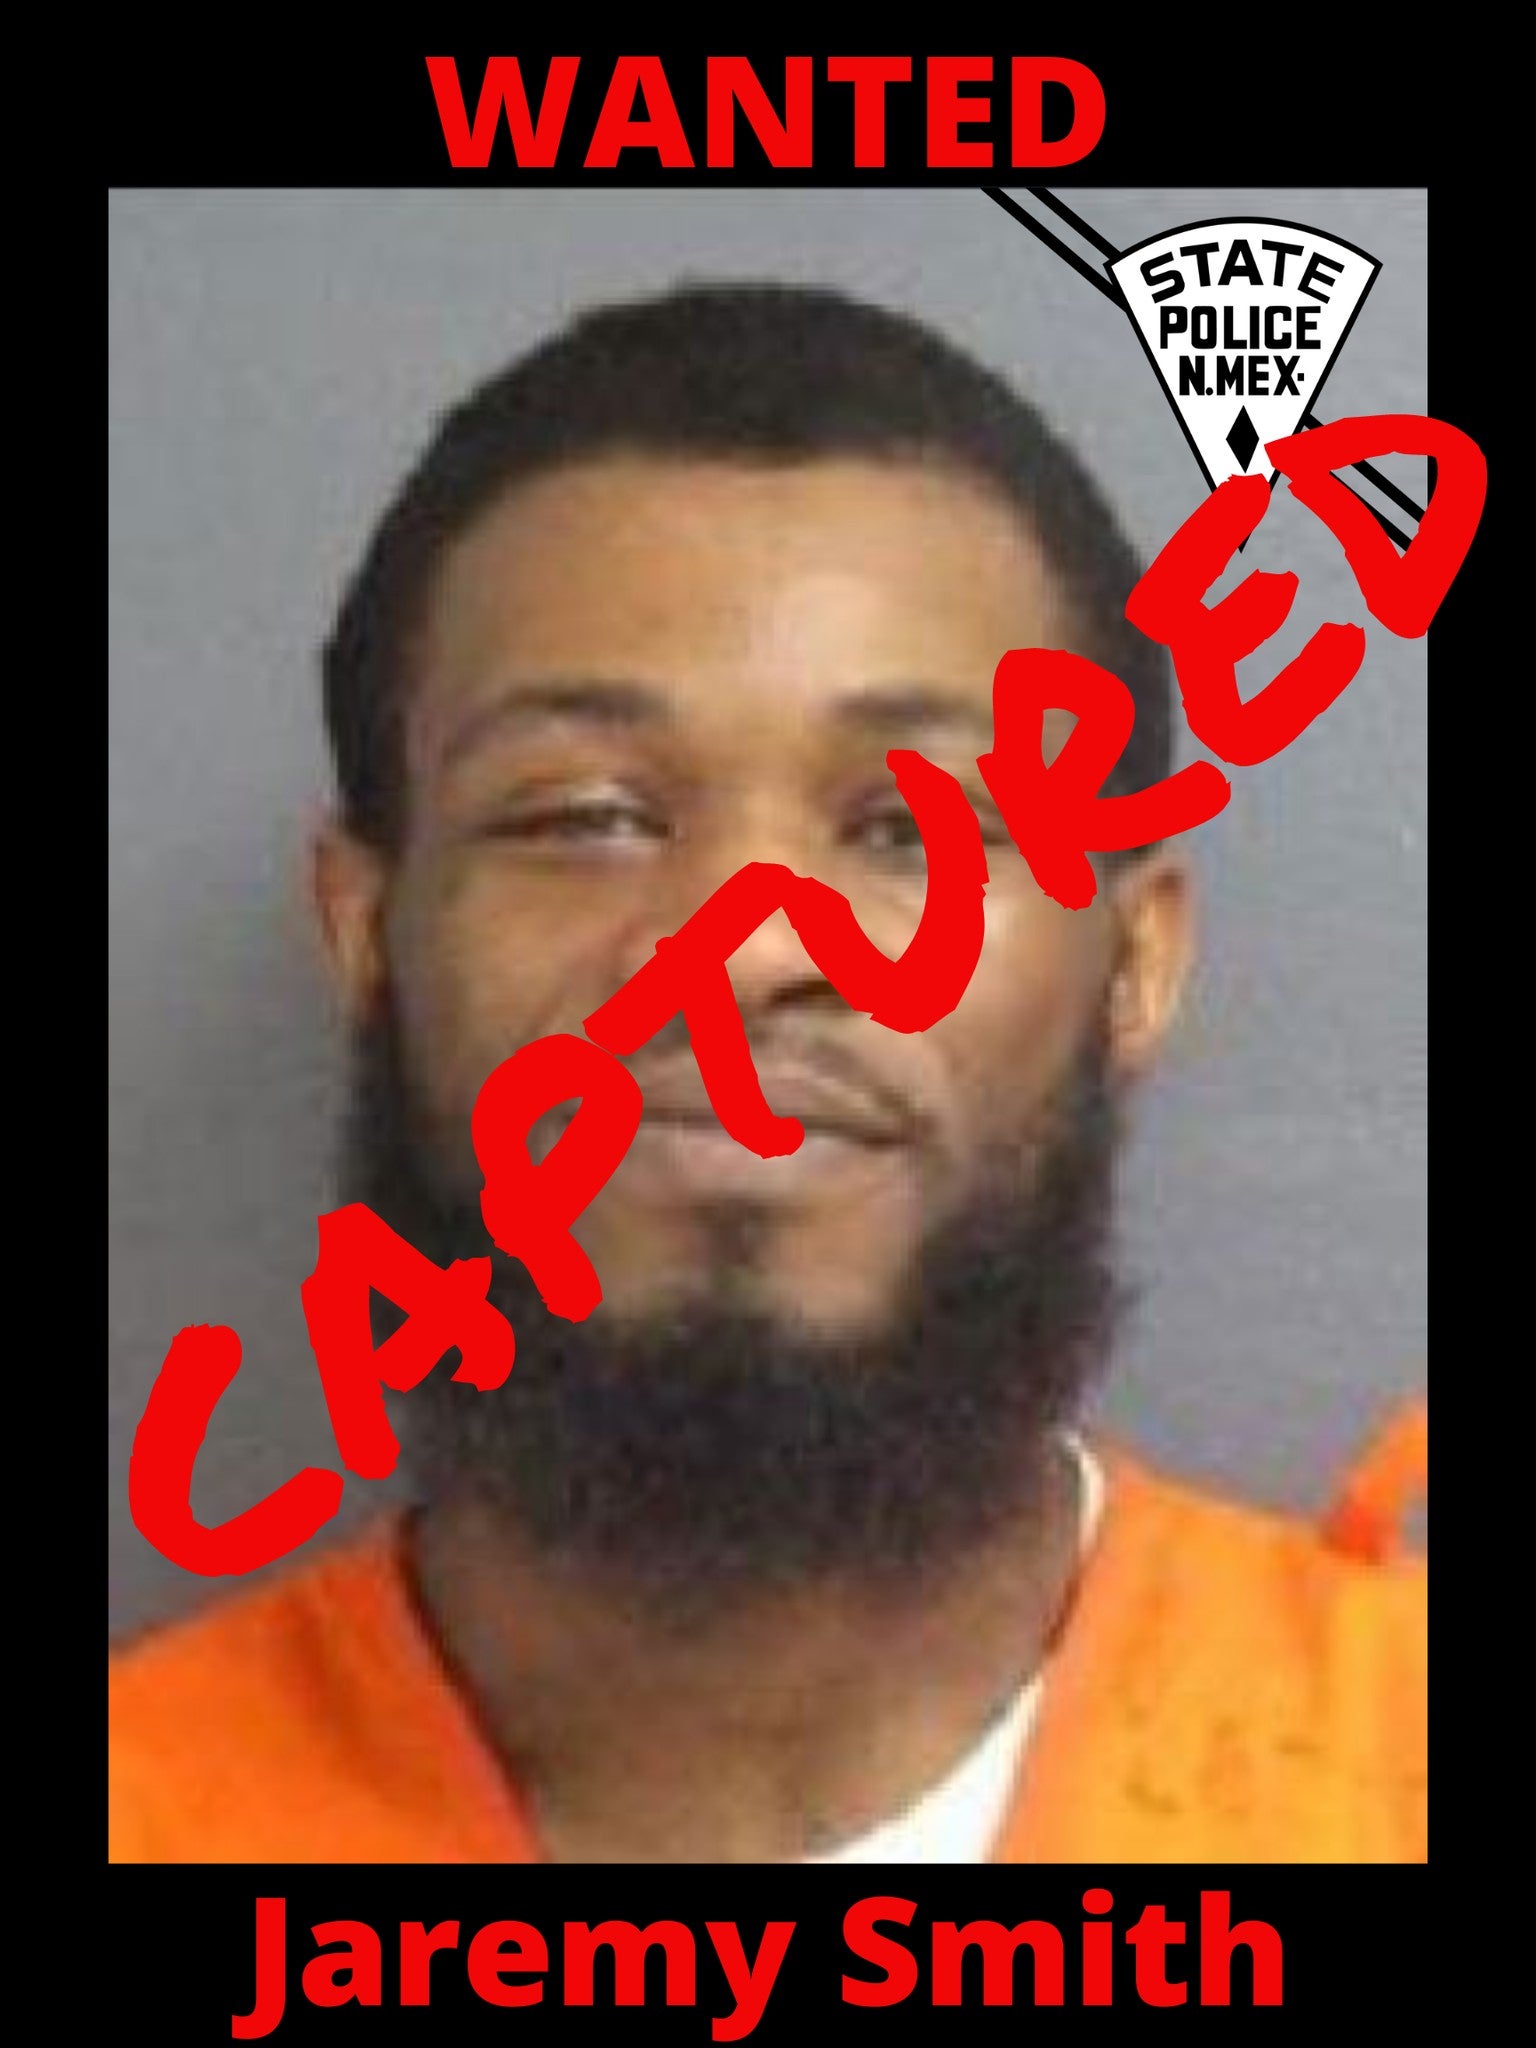 Jaremy Smith was captured after a days-long manhunt